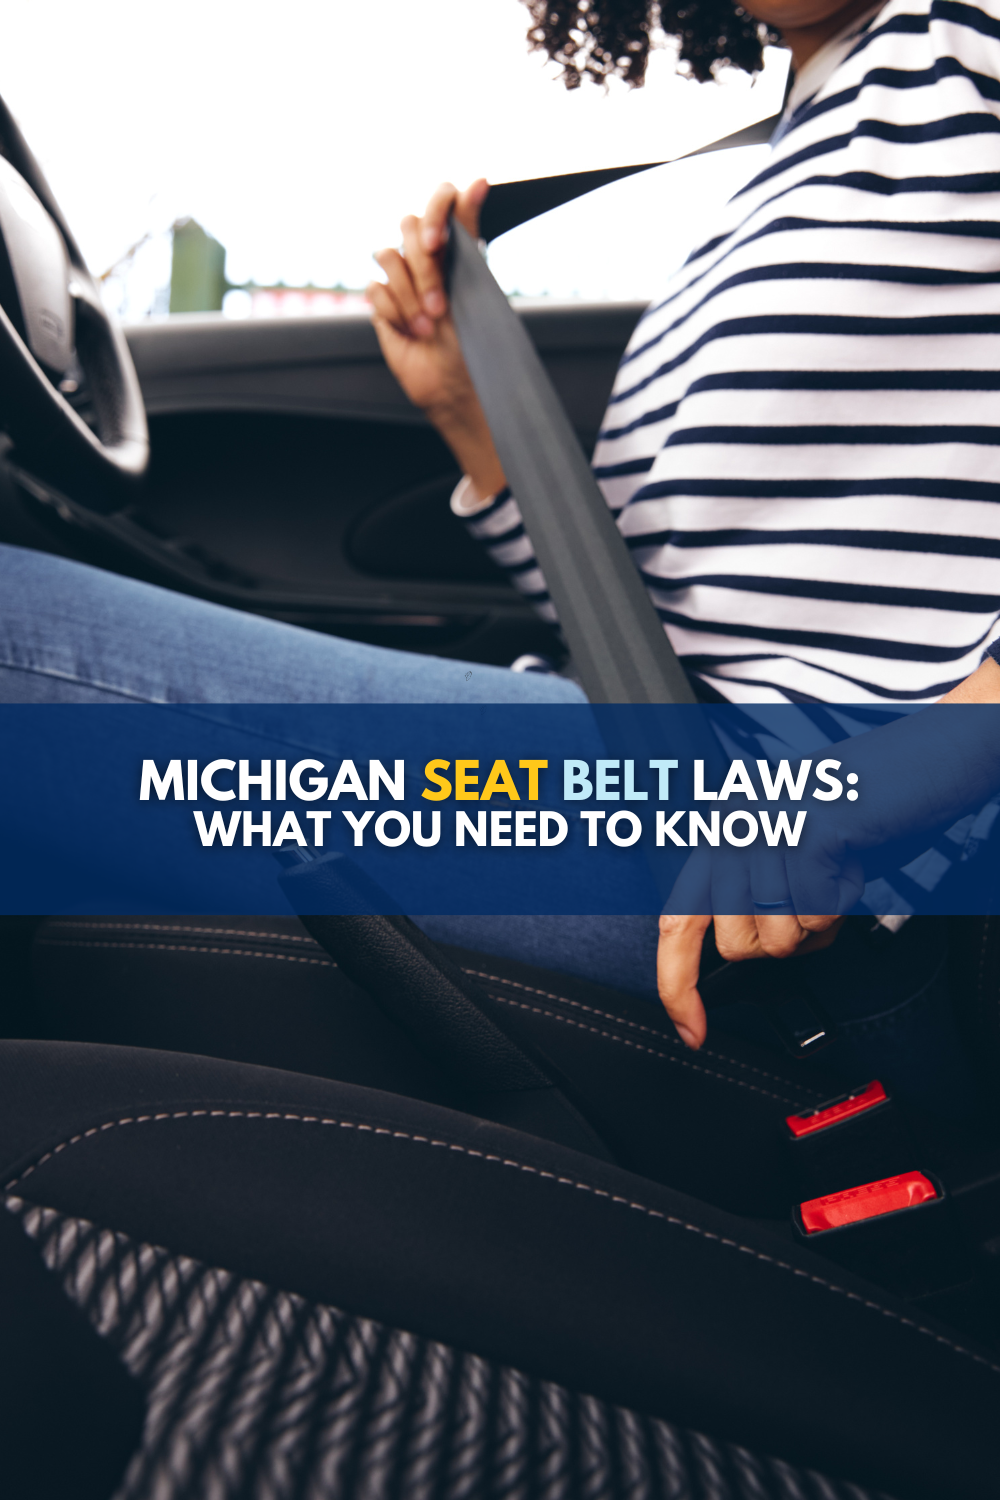 Michigan Seat Belt Laws Overview